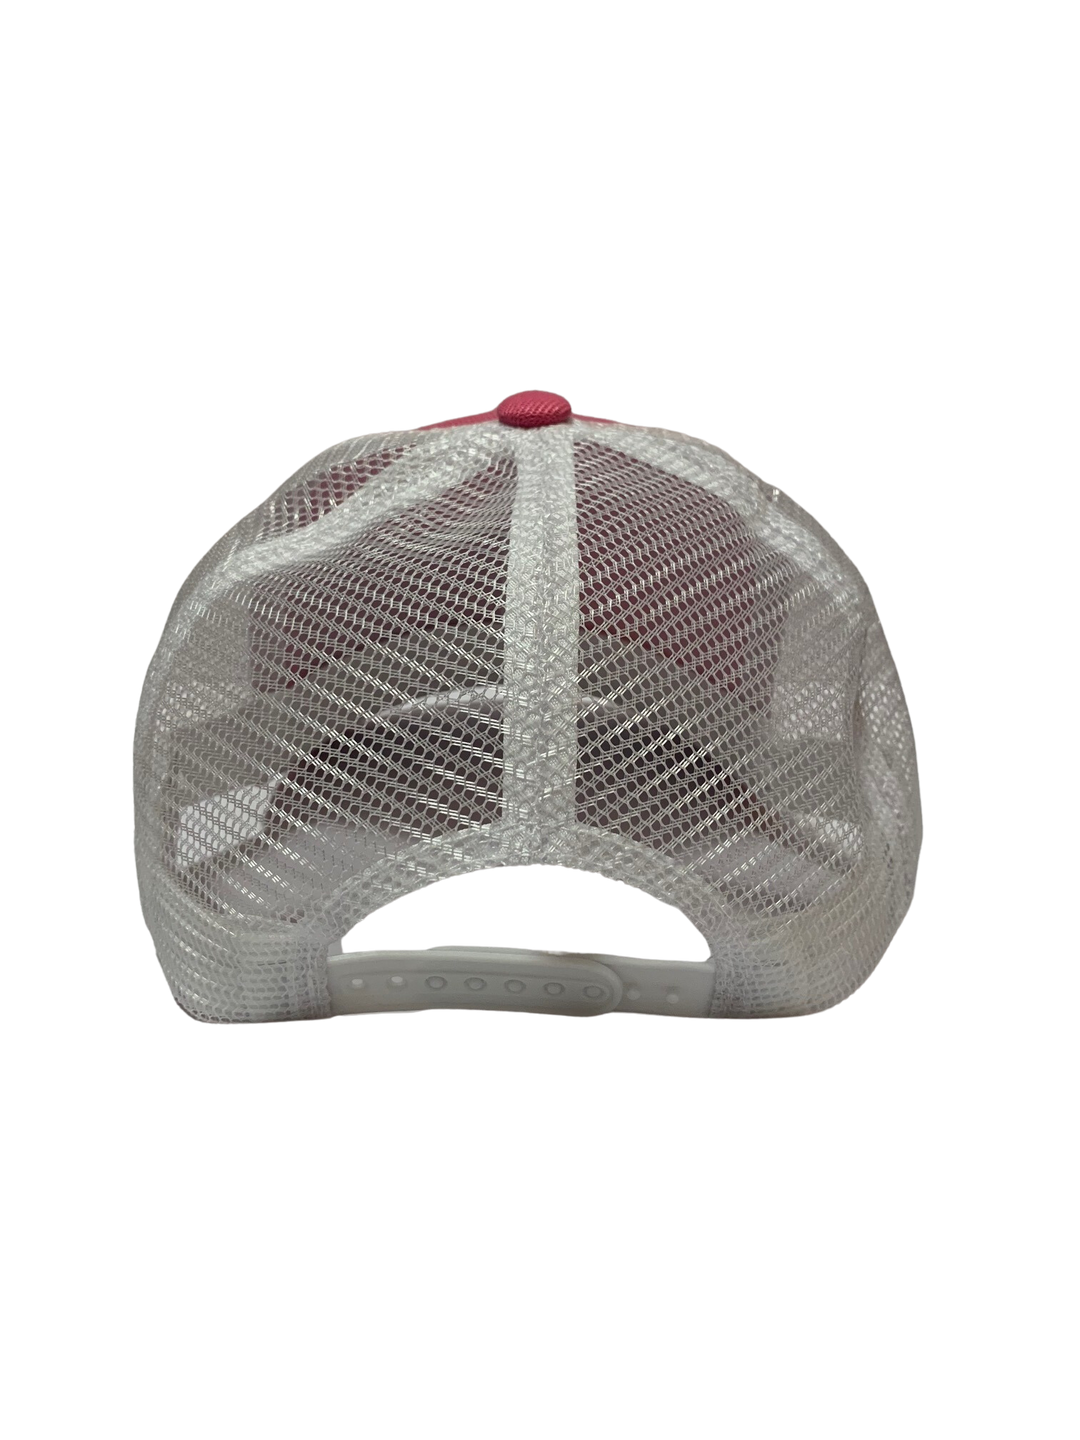 WB Pink White Patch Trucker Cap